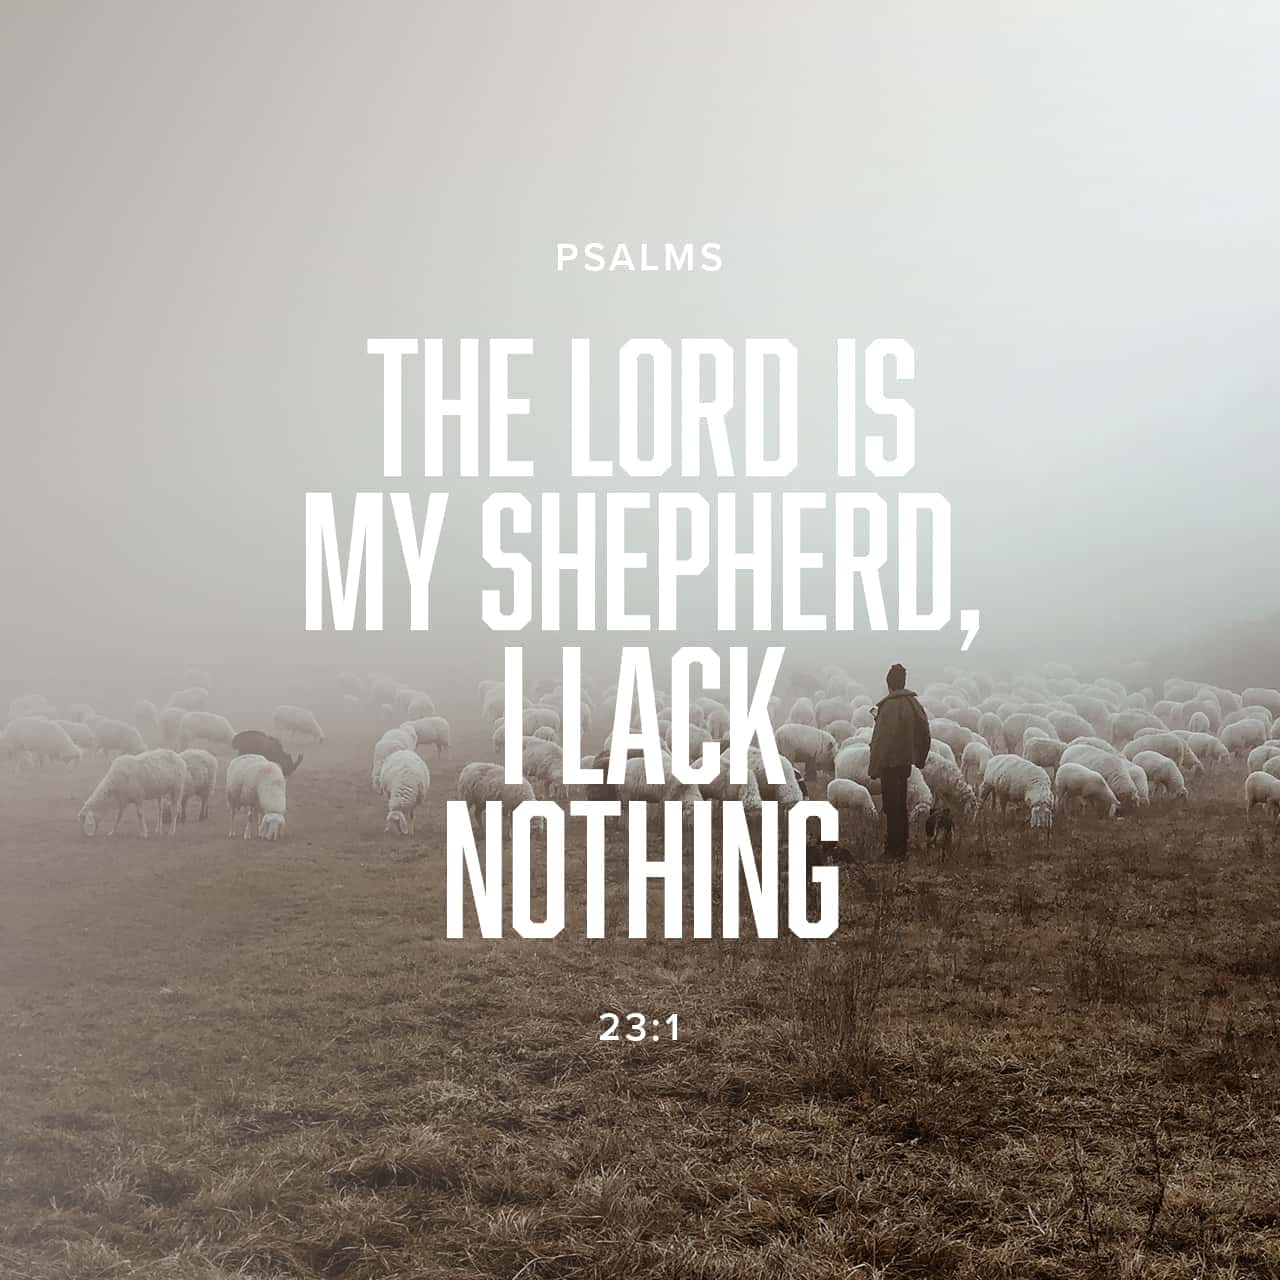 The Lord Is My Shepherd Deliverance Sermons And Prayers